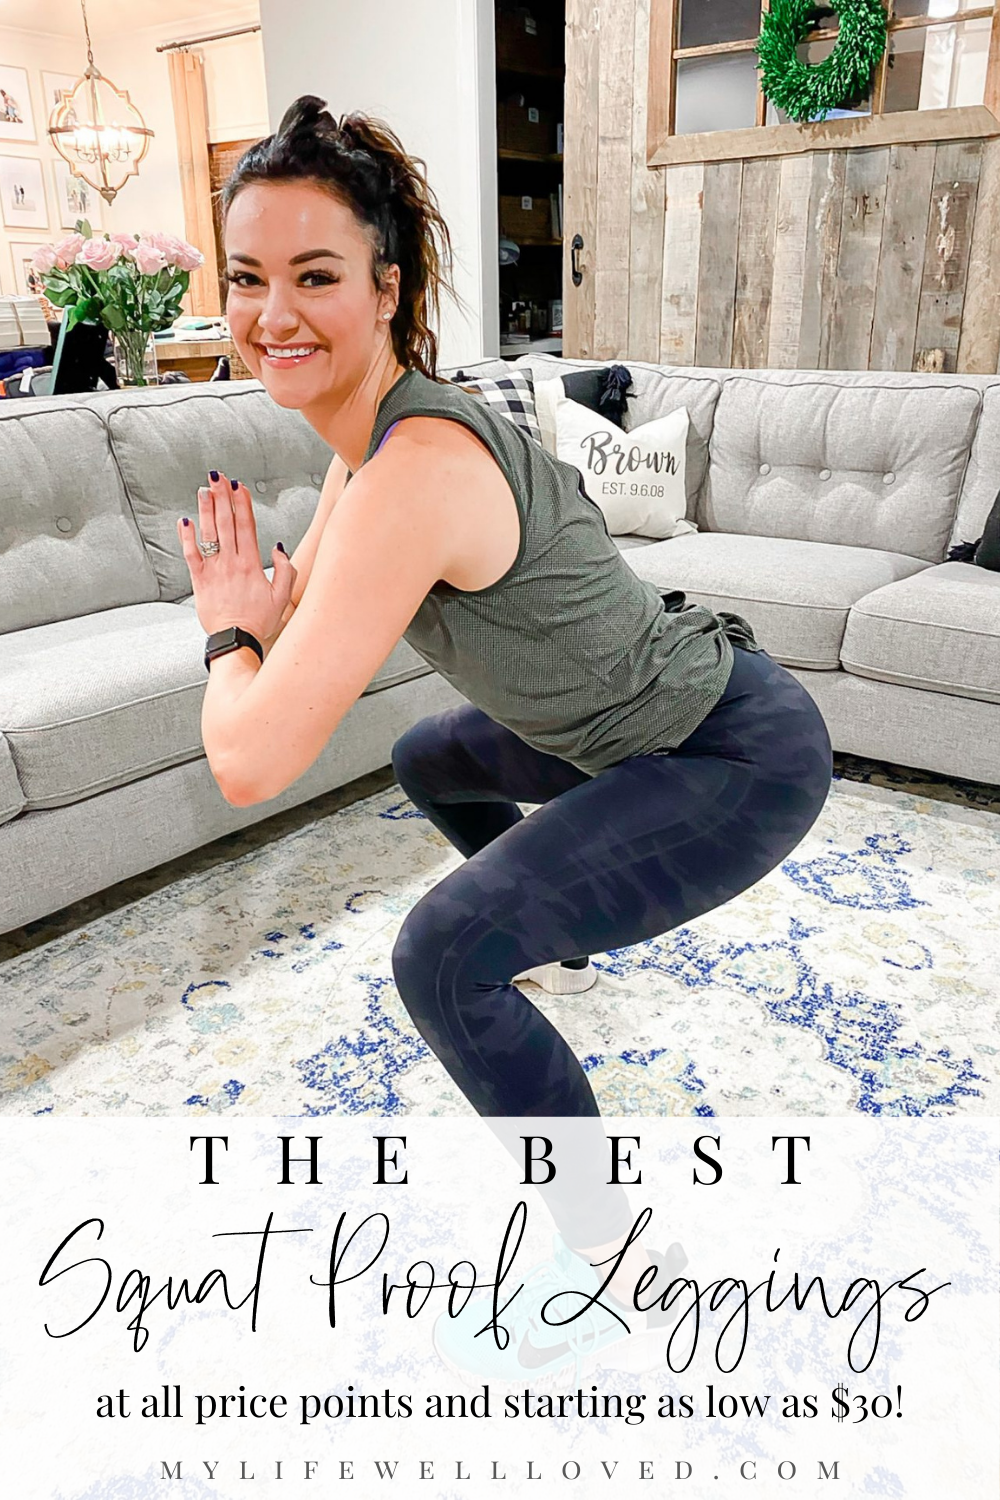 Fitness: Best Squat Proof Leggings For Women - Healthy By Heather